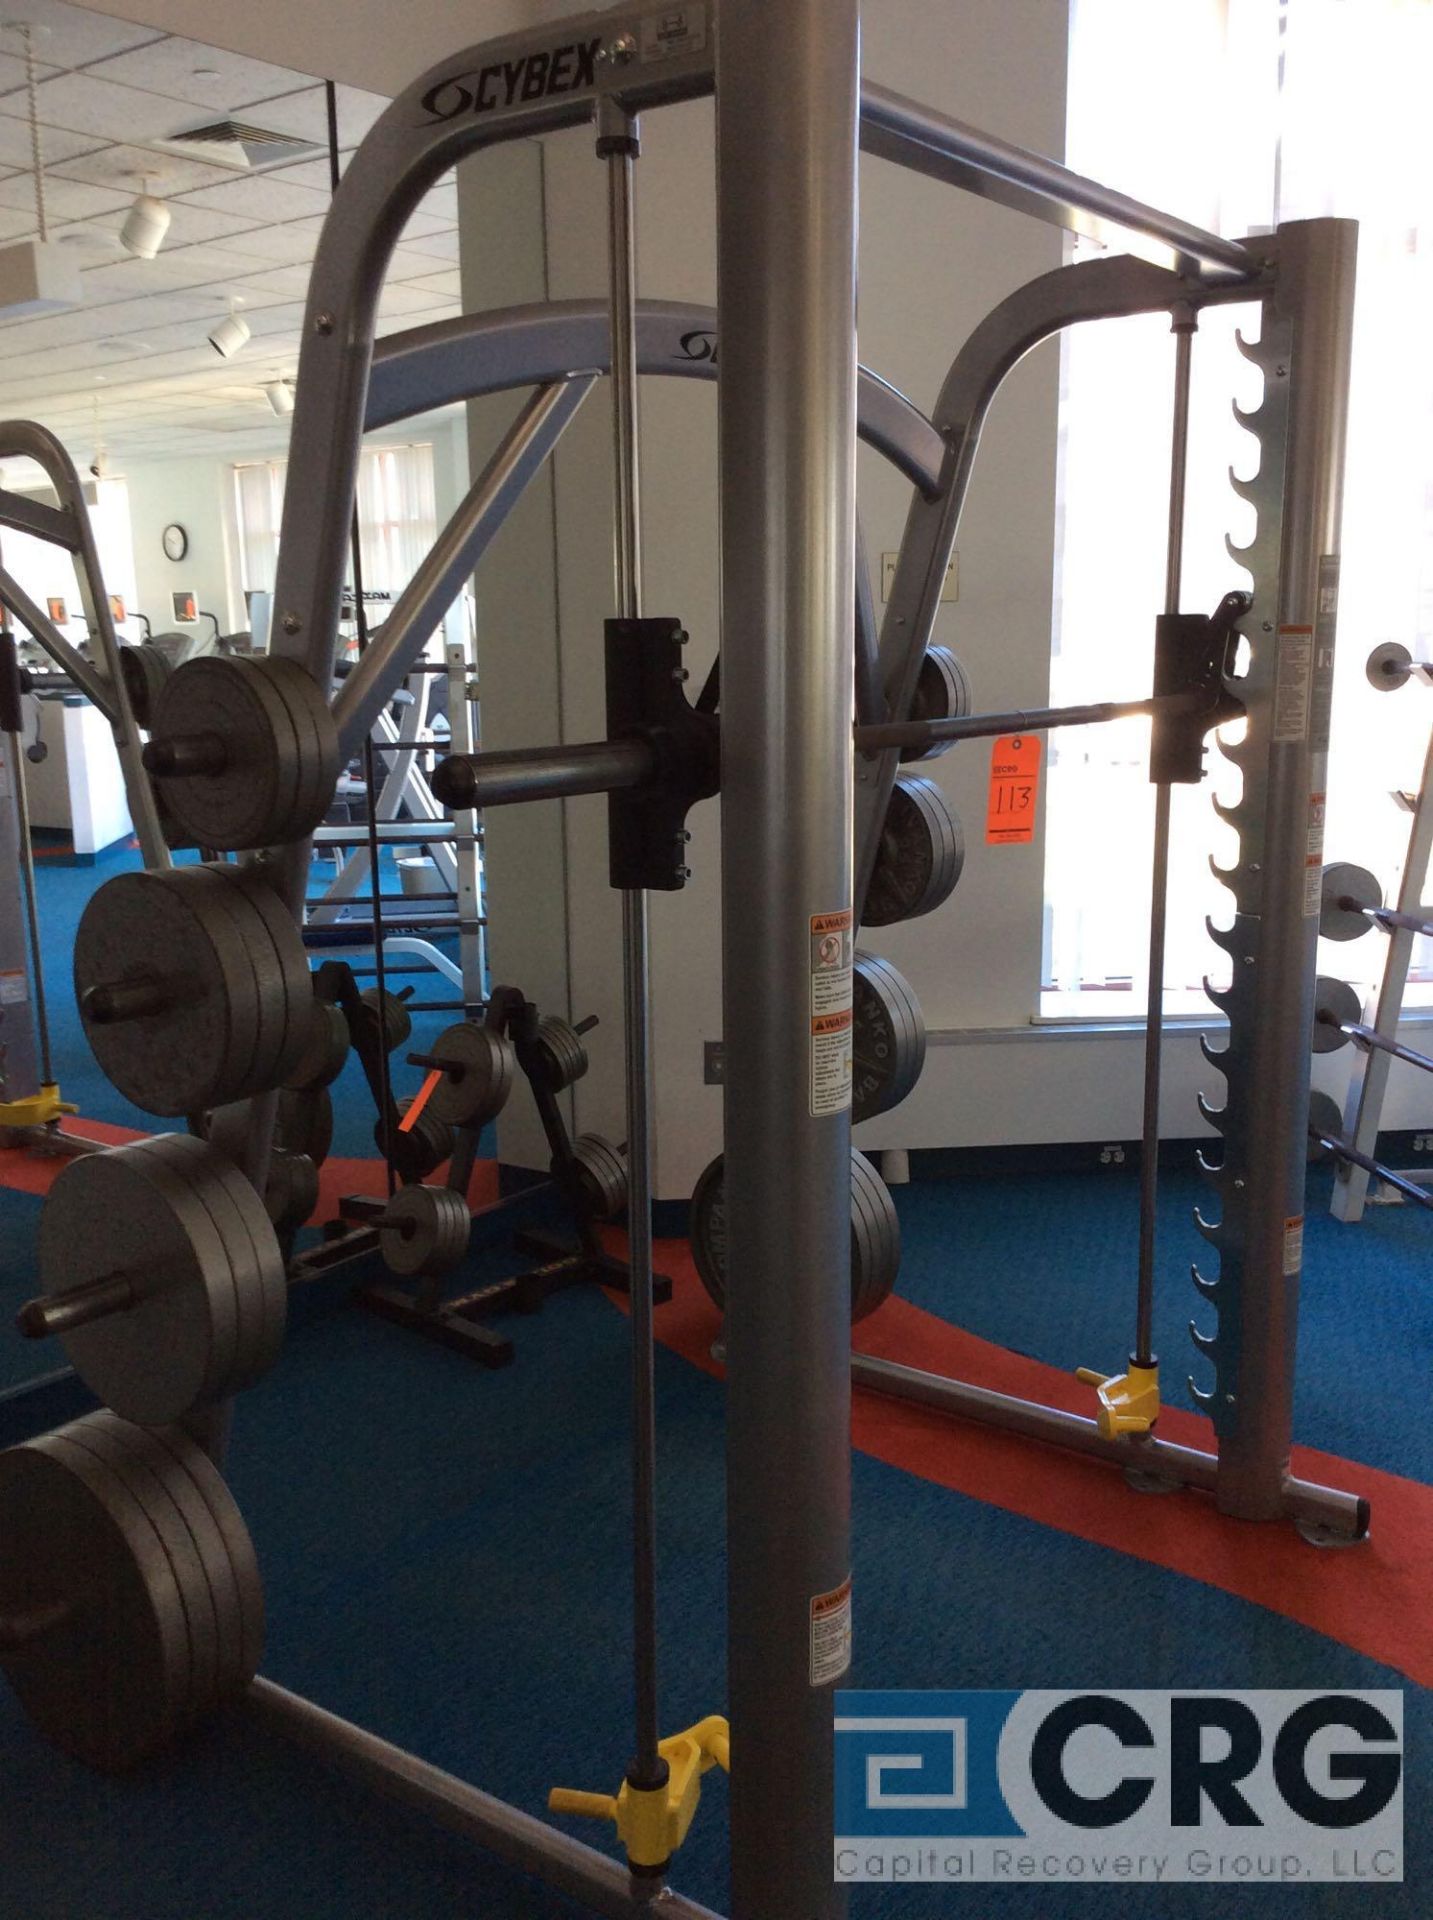 Cybex Smith Press Exercise Station - Includes Squats, Bench and Incline Presses, Bent Over Rows, - Image 2 of 3